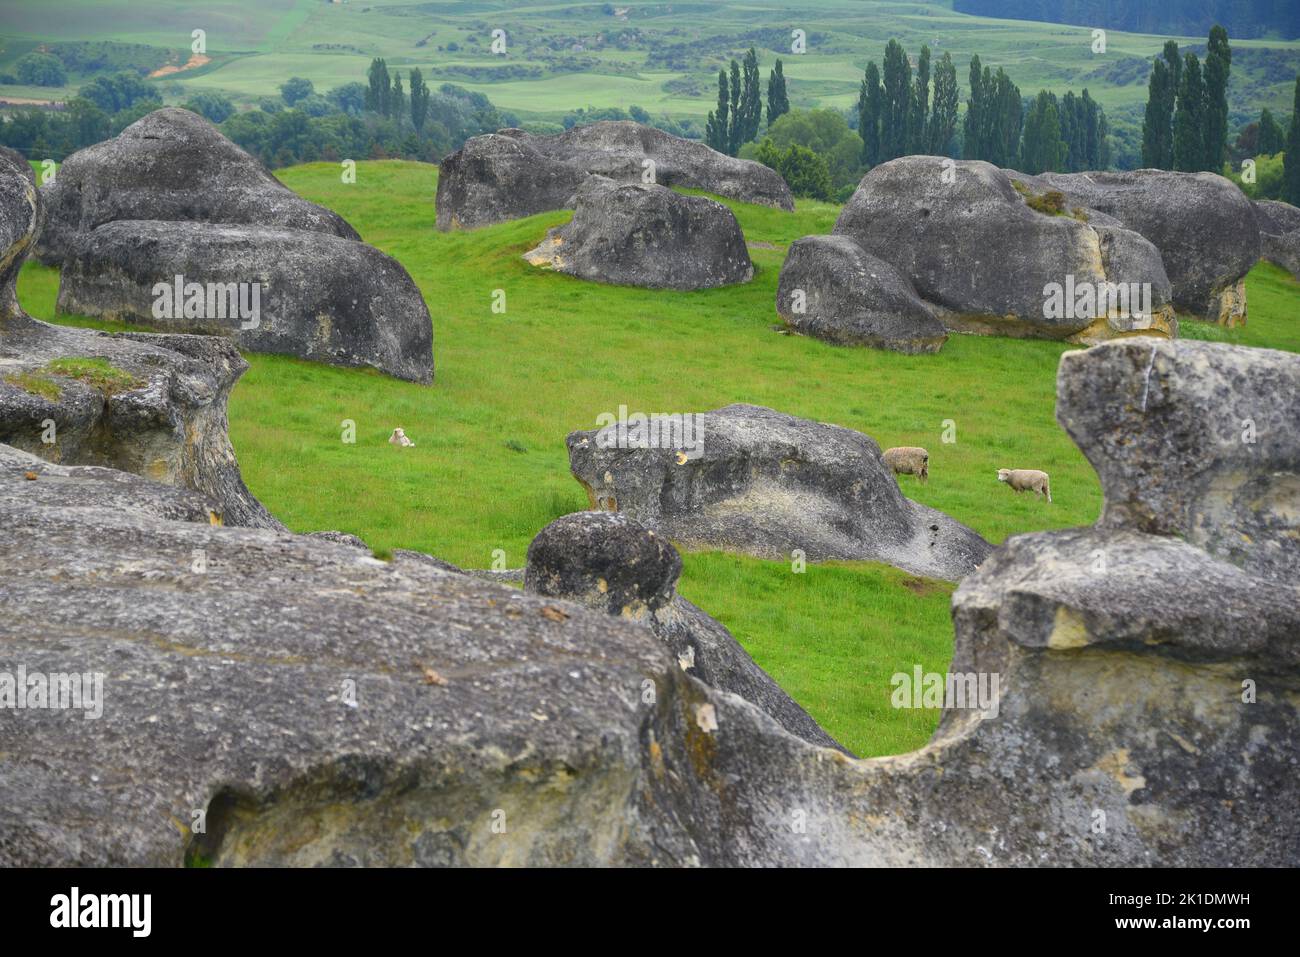 New Zealand- Large format panoramic landscape of sheep grazing on grassland among amazing huge boulders on the South island. Stock Photo